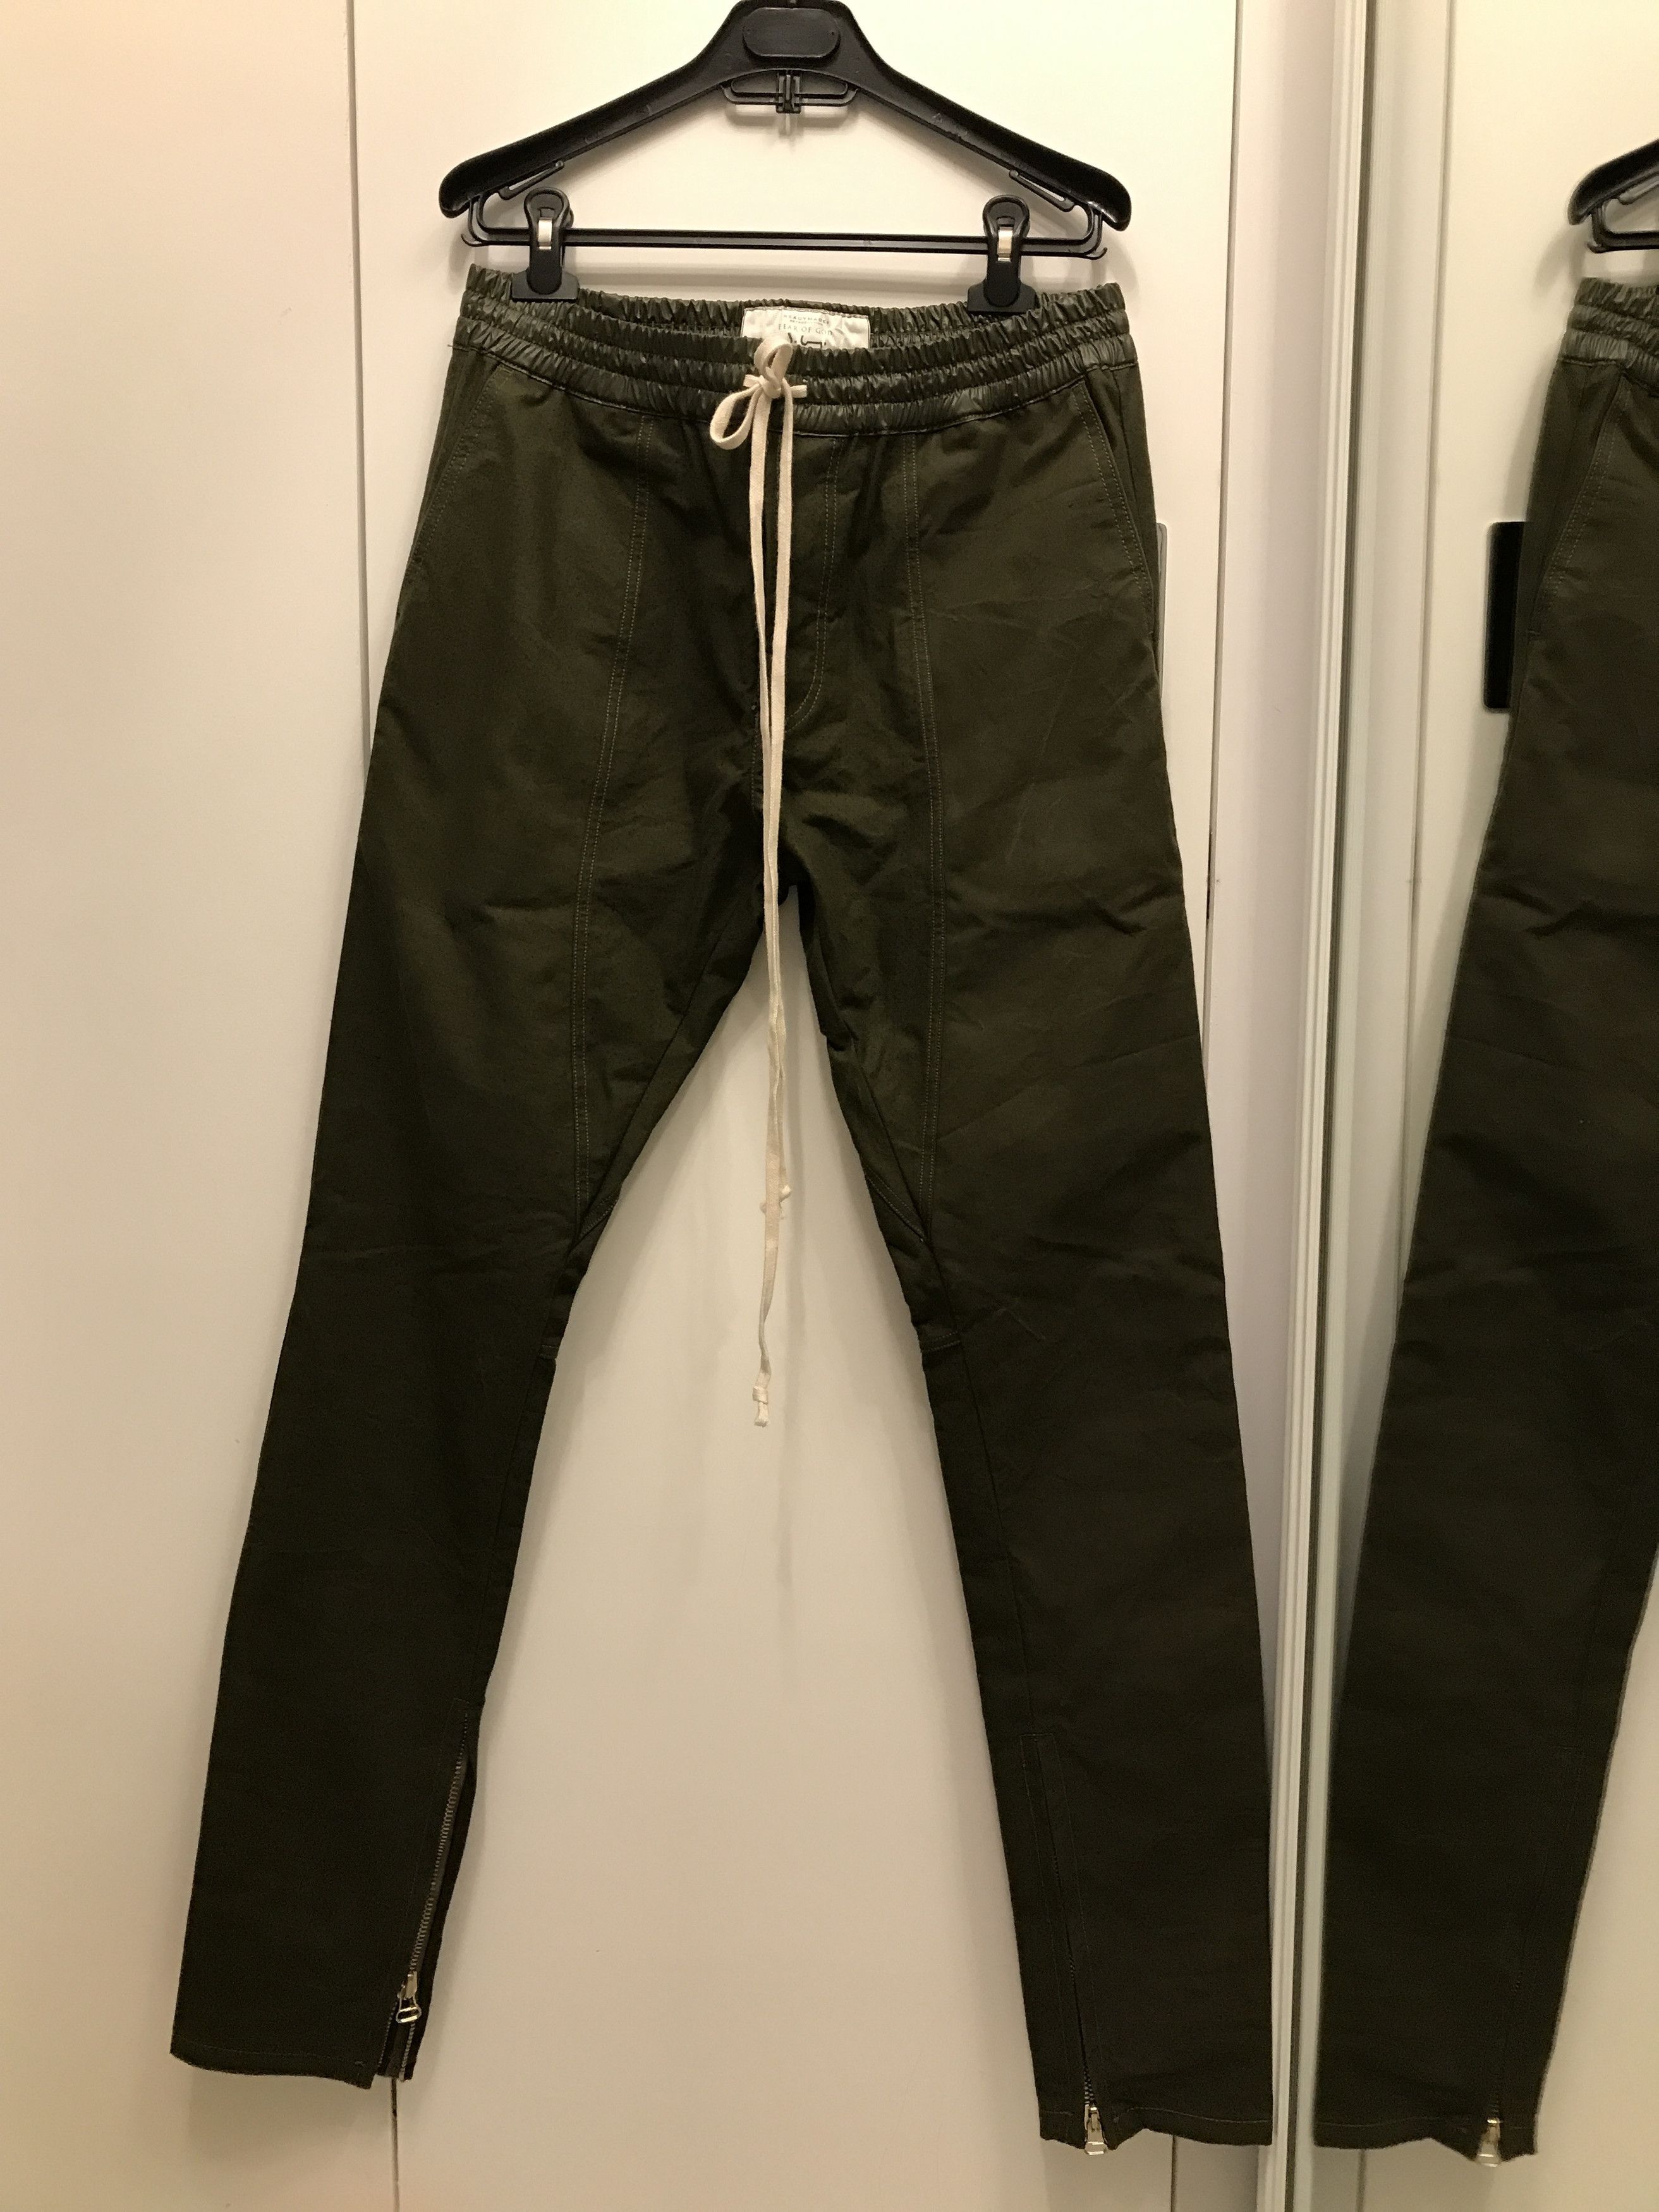 Fear of God Fear of God x READYMADE Official Green Trousers | Grailed